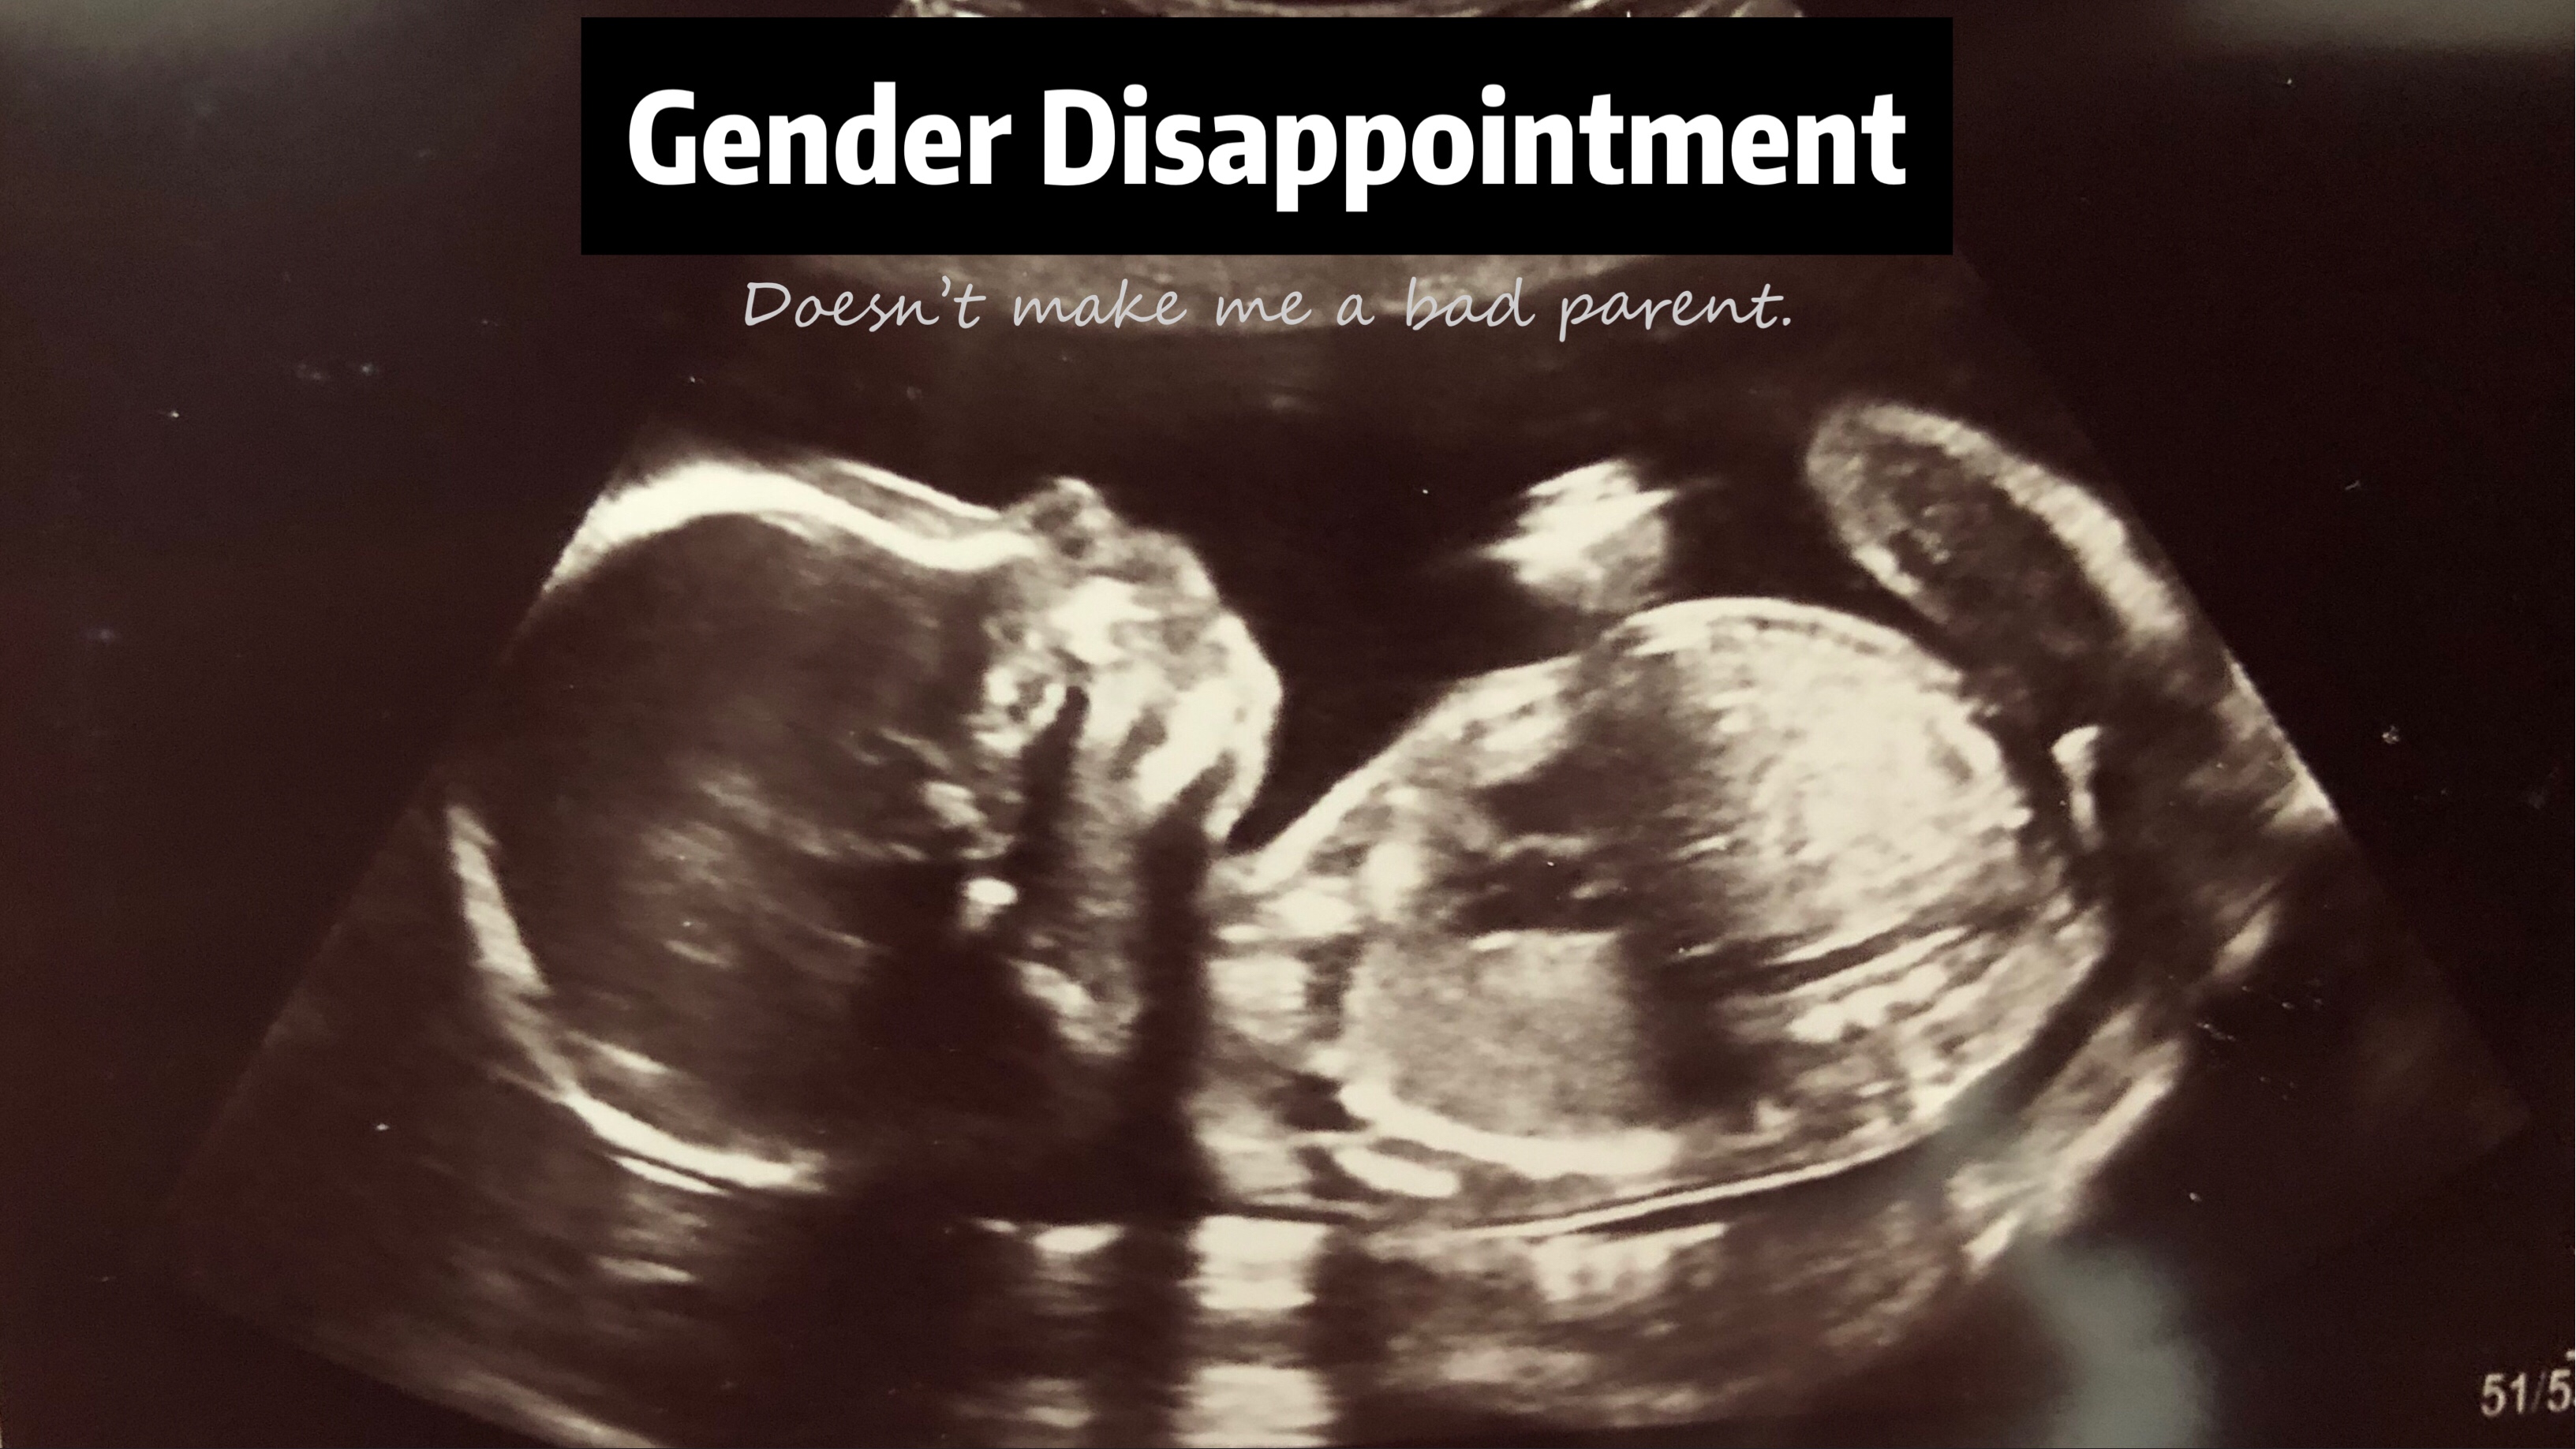 Coping with Gender Disappointment